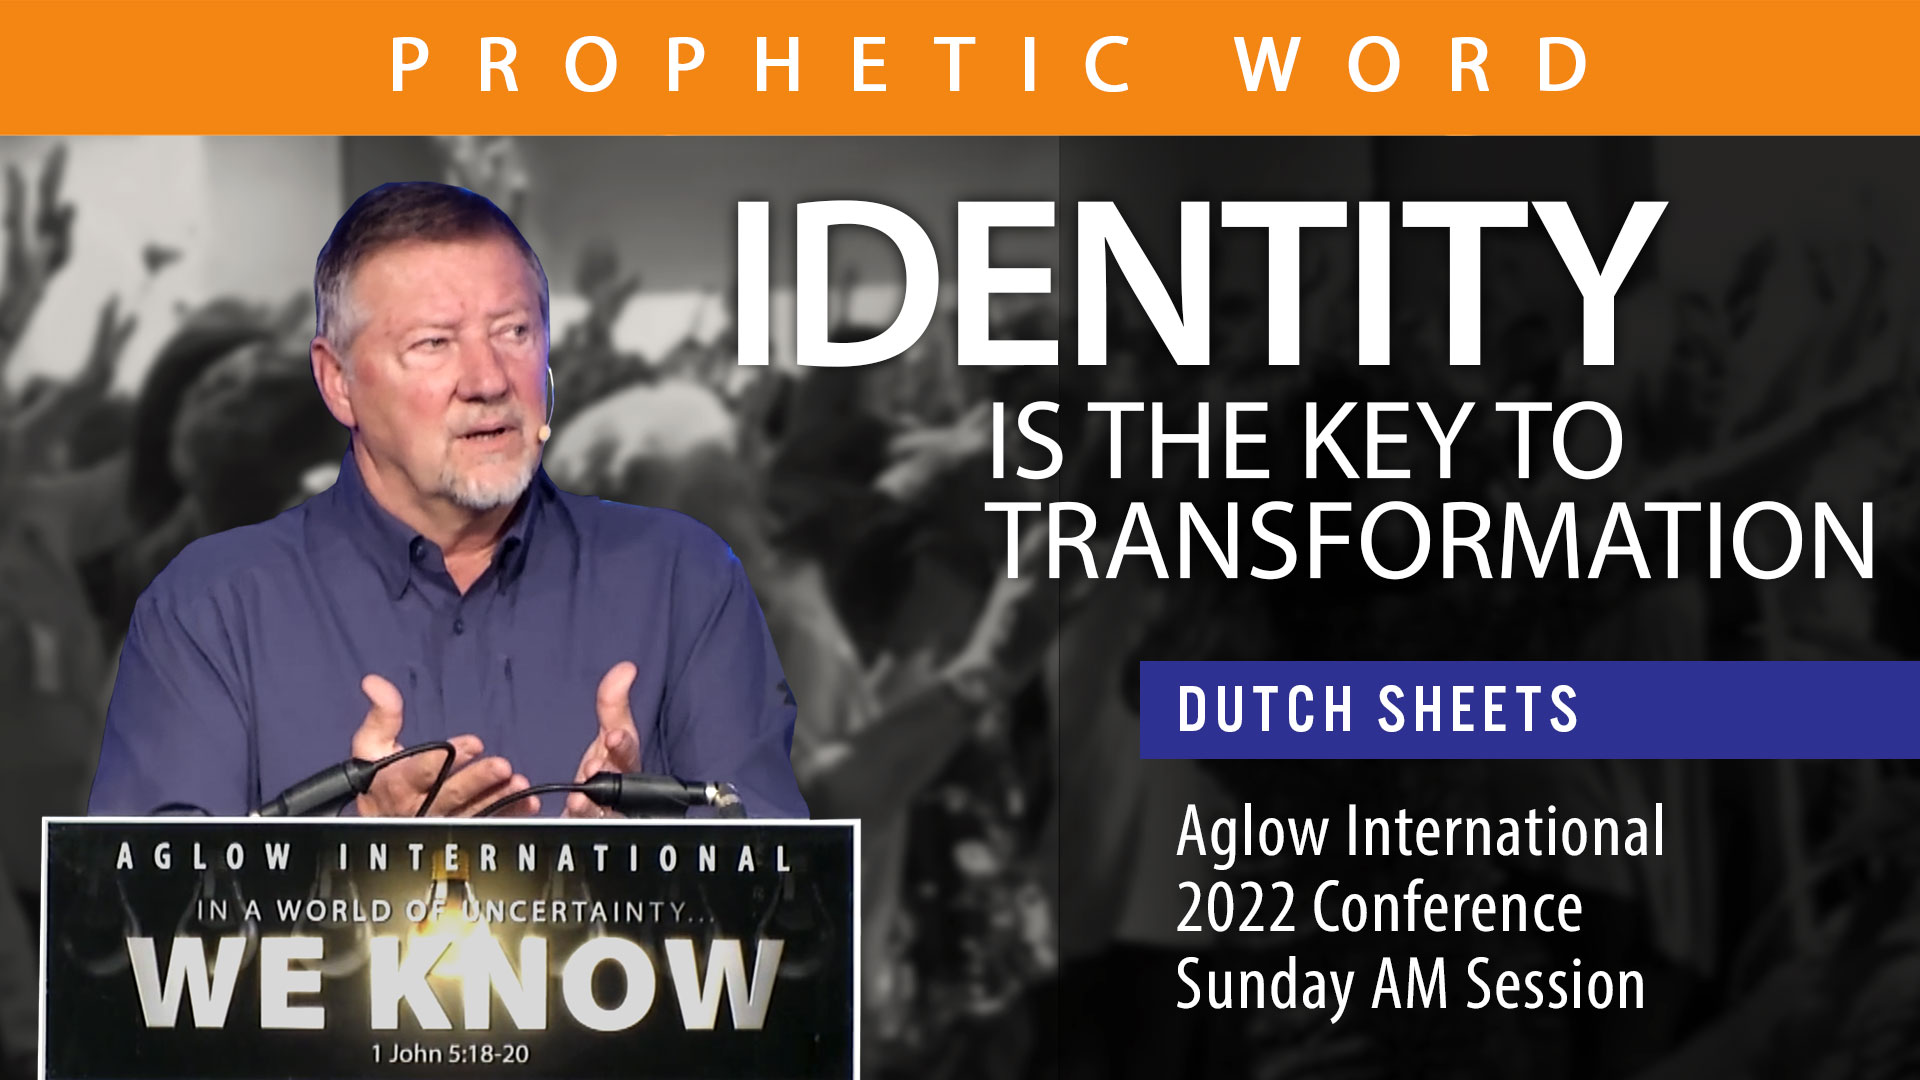 Dutch Sheets (2022 Aglow Conference Sunday AM Session)